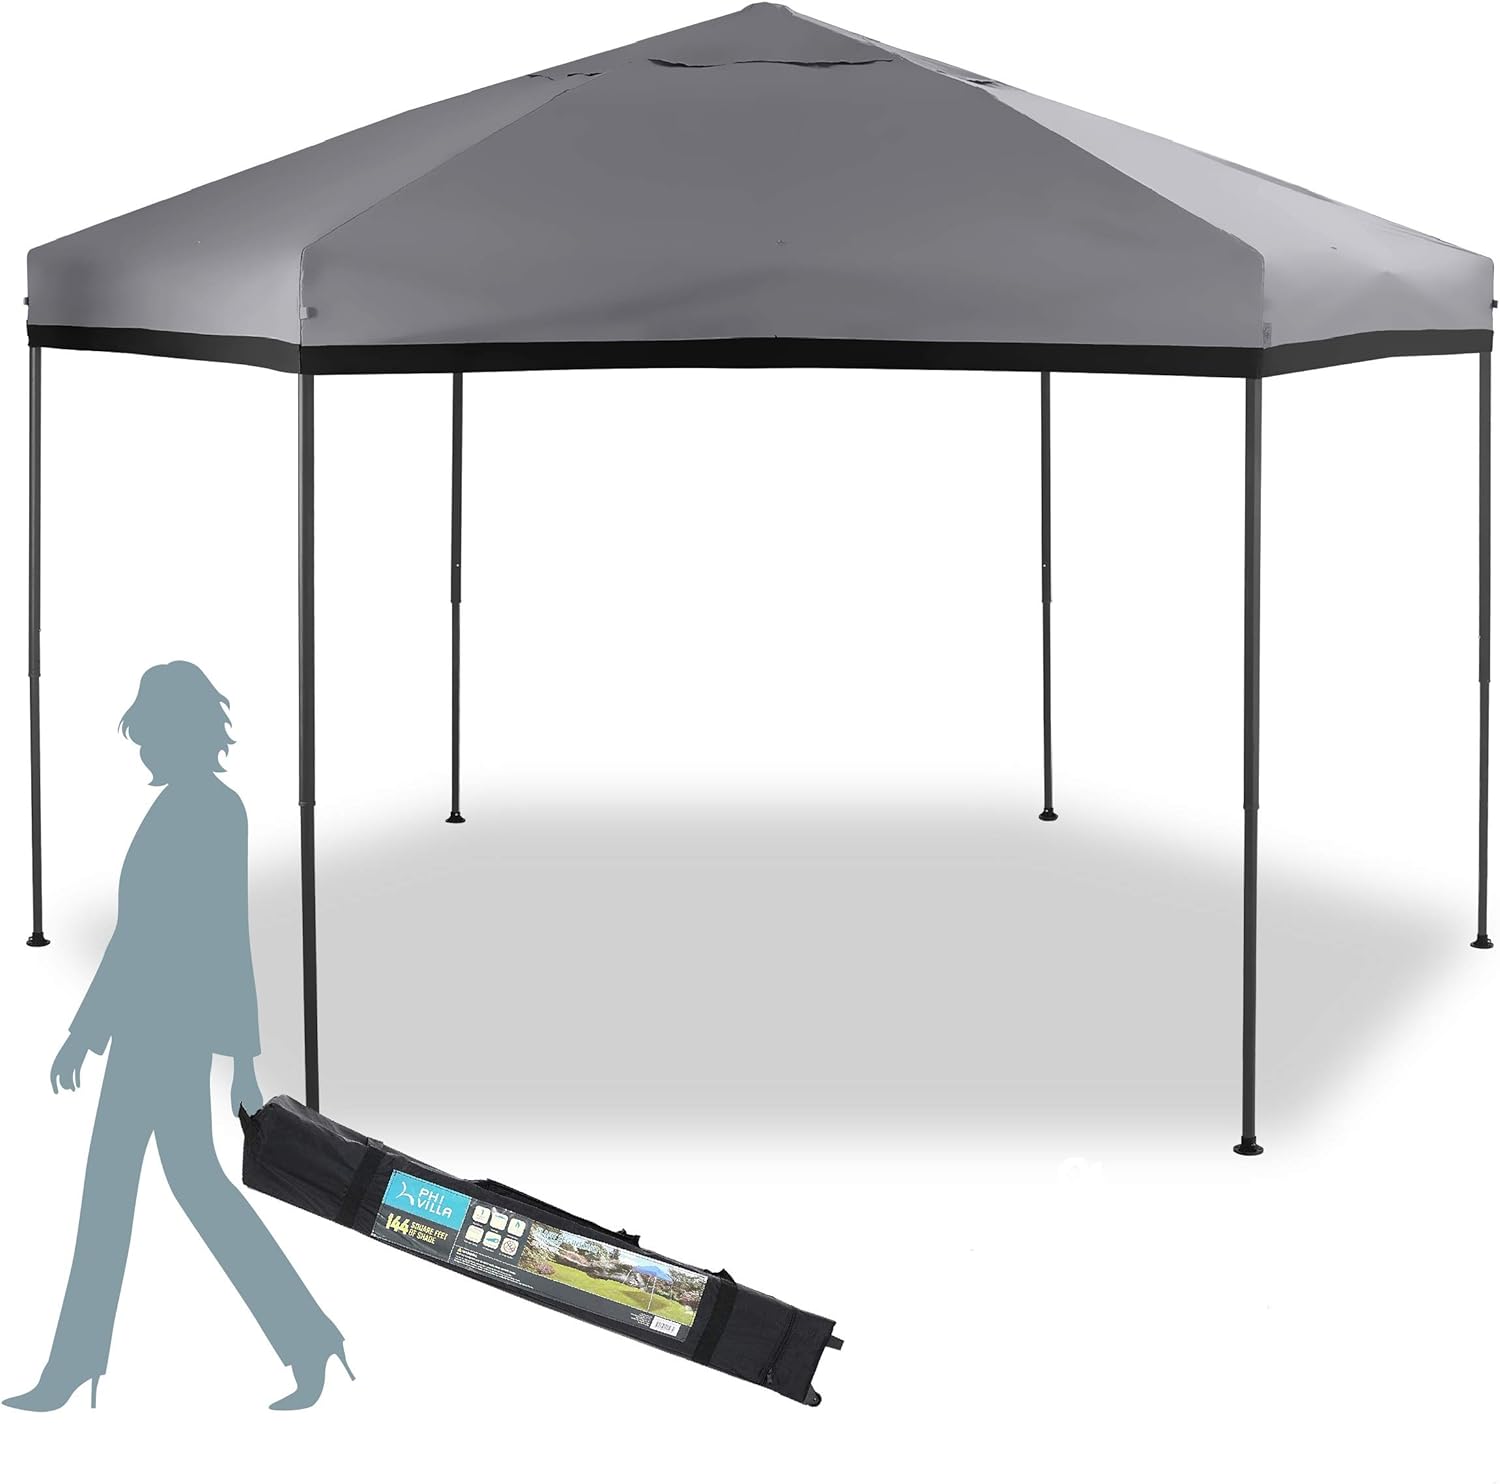 MFSTUDIO 12'x10' Hexagon Pop-Up Portable 6 Sided Gazebo,Instant Screened Canopies with Heavy Duty Roller Bag(112 Square Feet of Shade),Grey